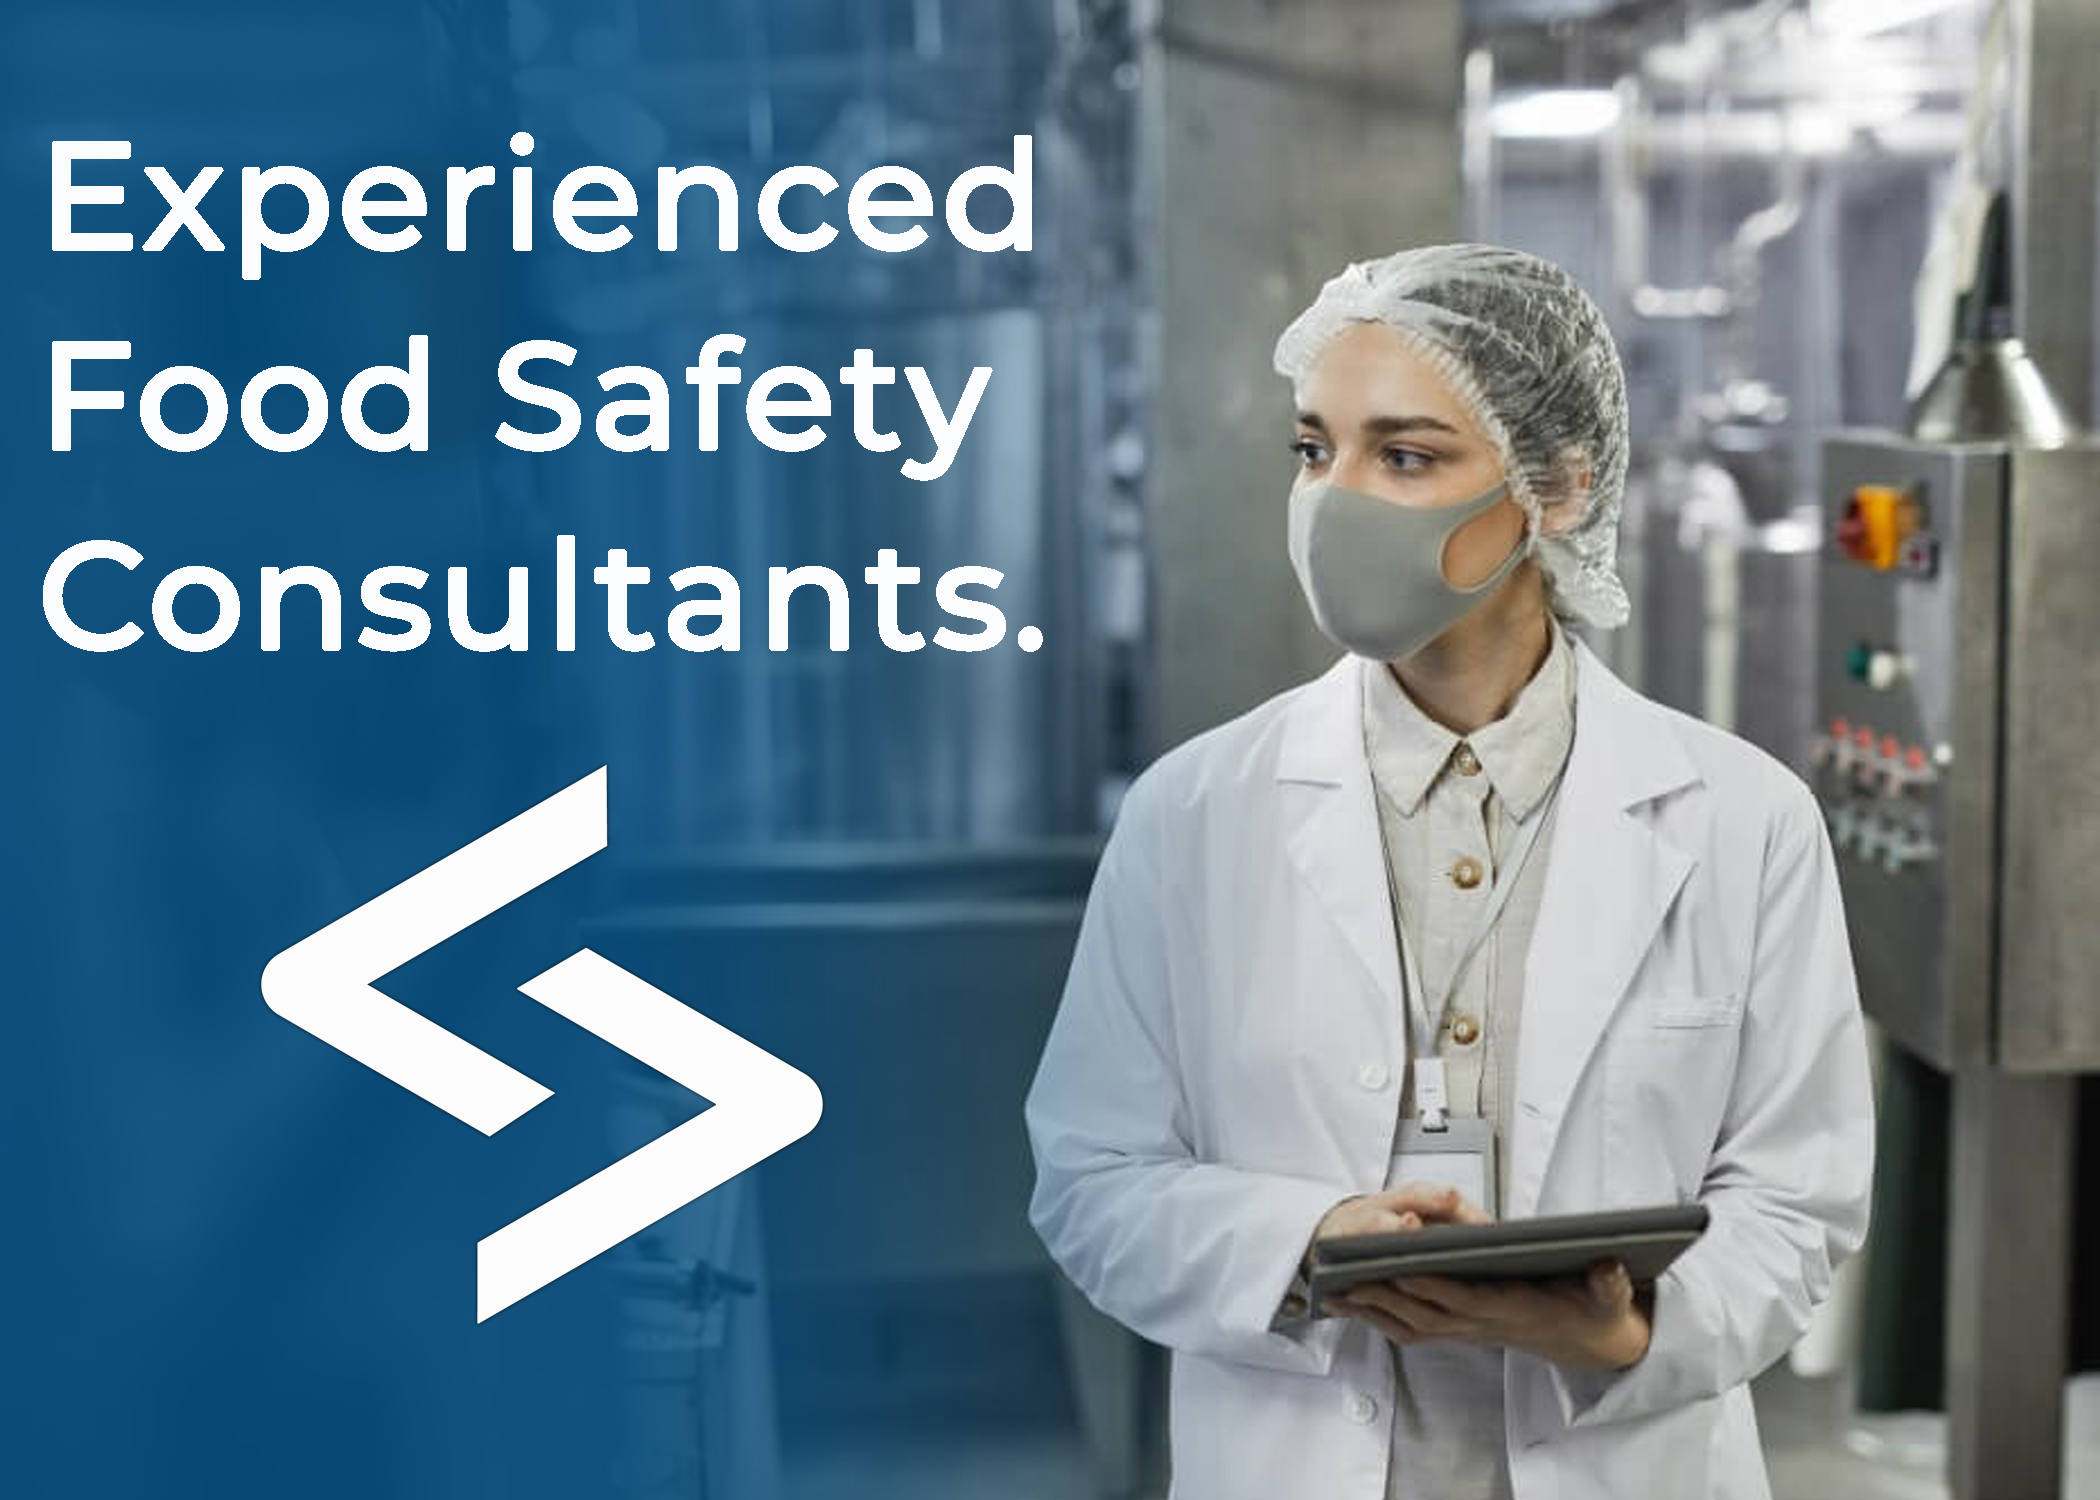 SAFO - What food safety challenges can food safety consultants help with?